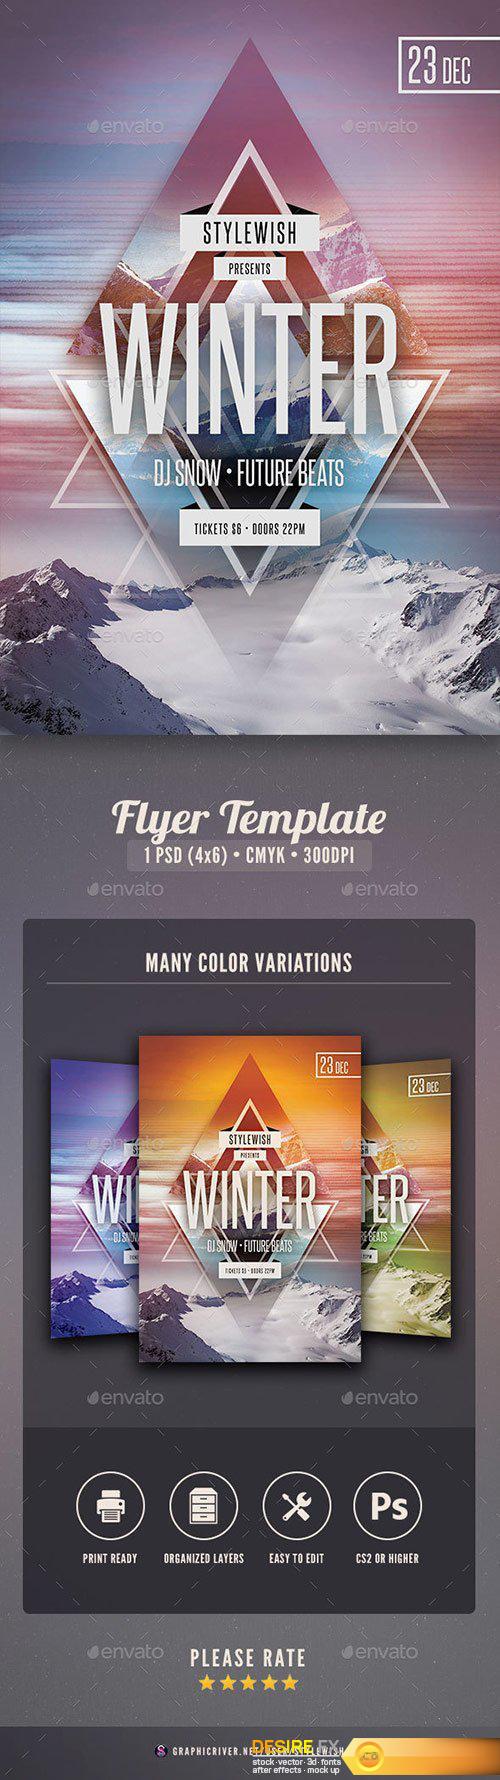 Graphicriver - Winter Party Flyer 9221264